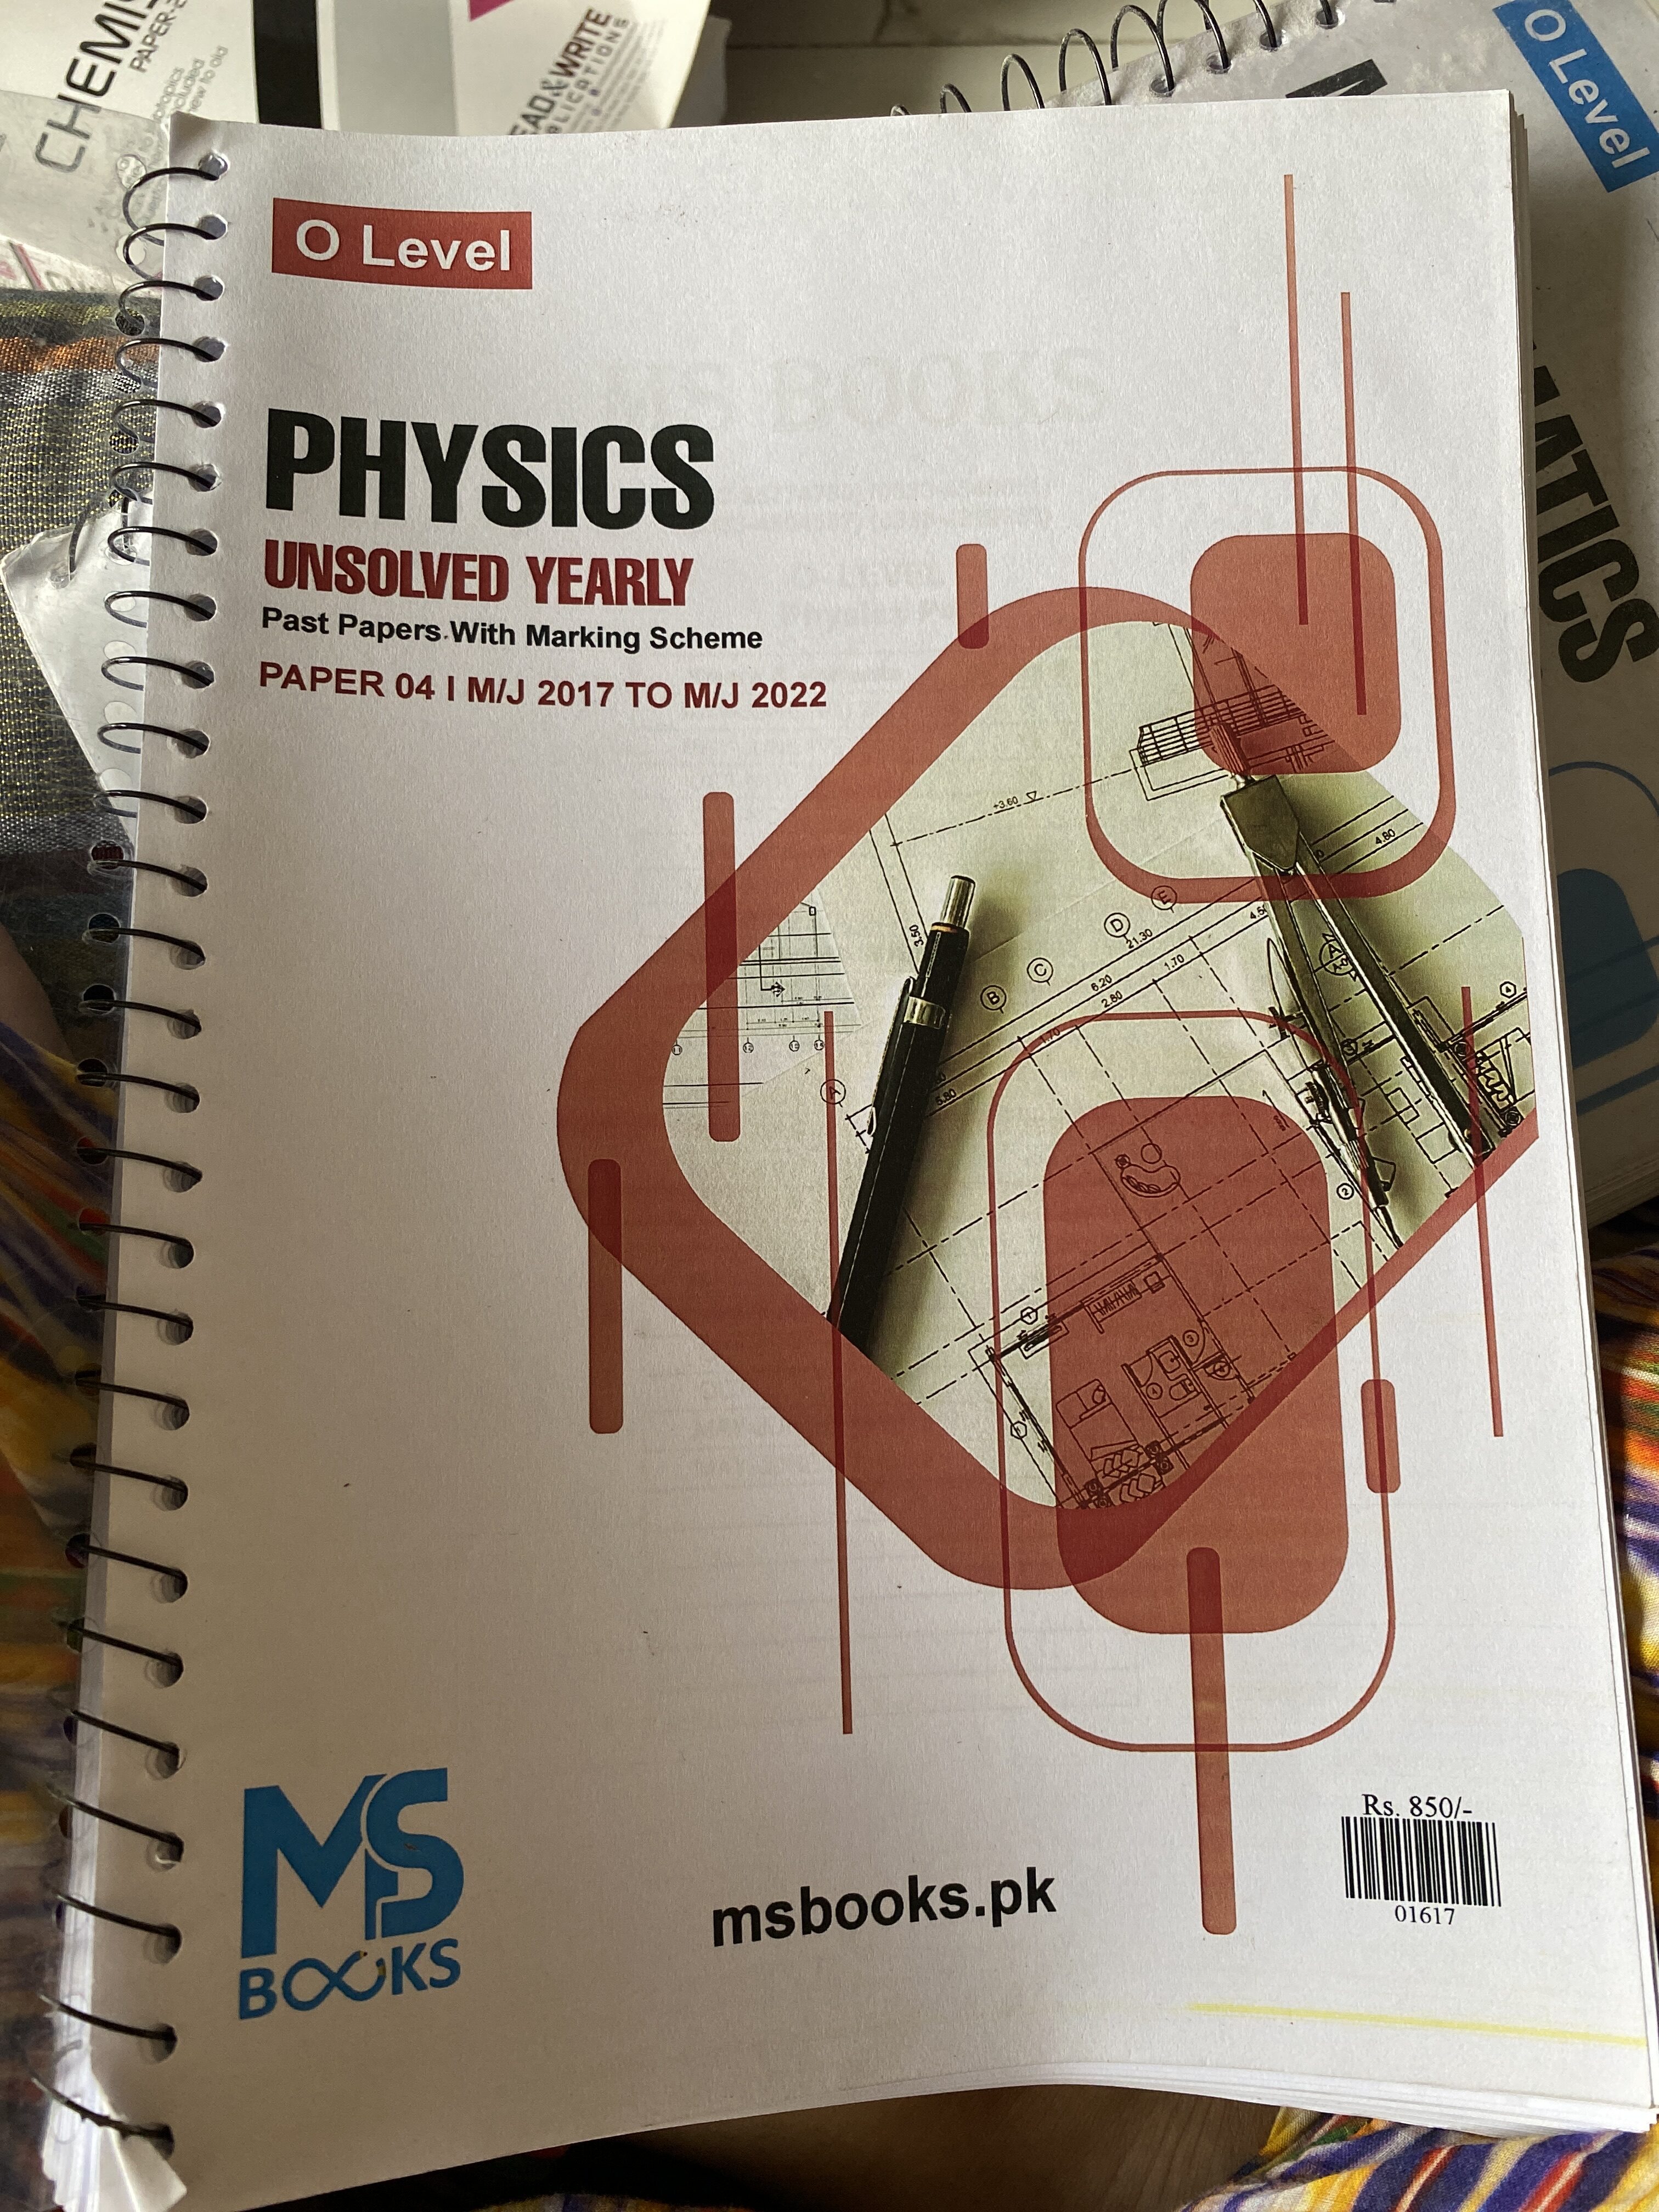 Olevel physics unsolved yearly pastpapers p4